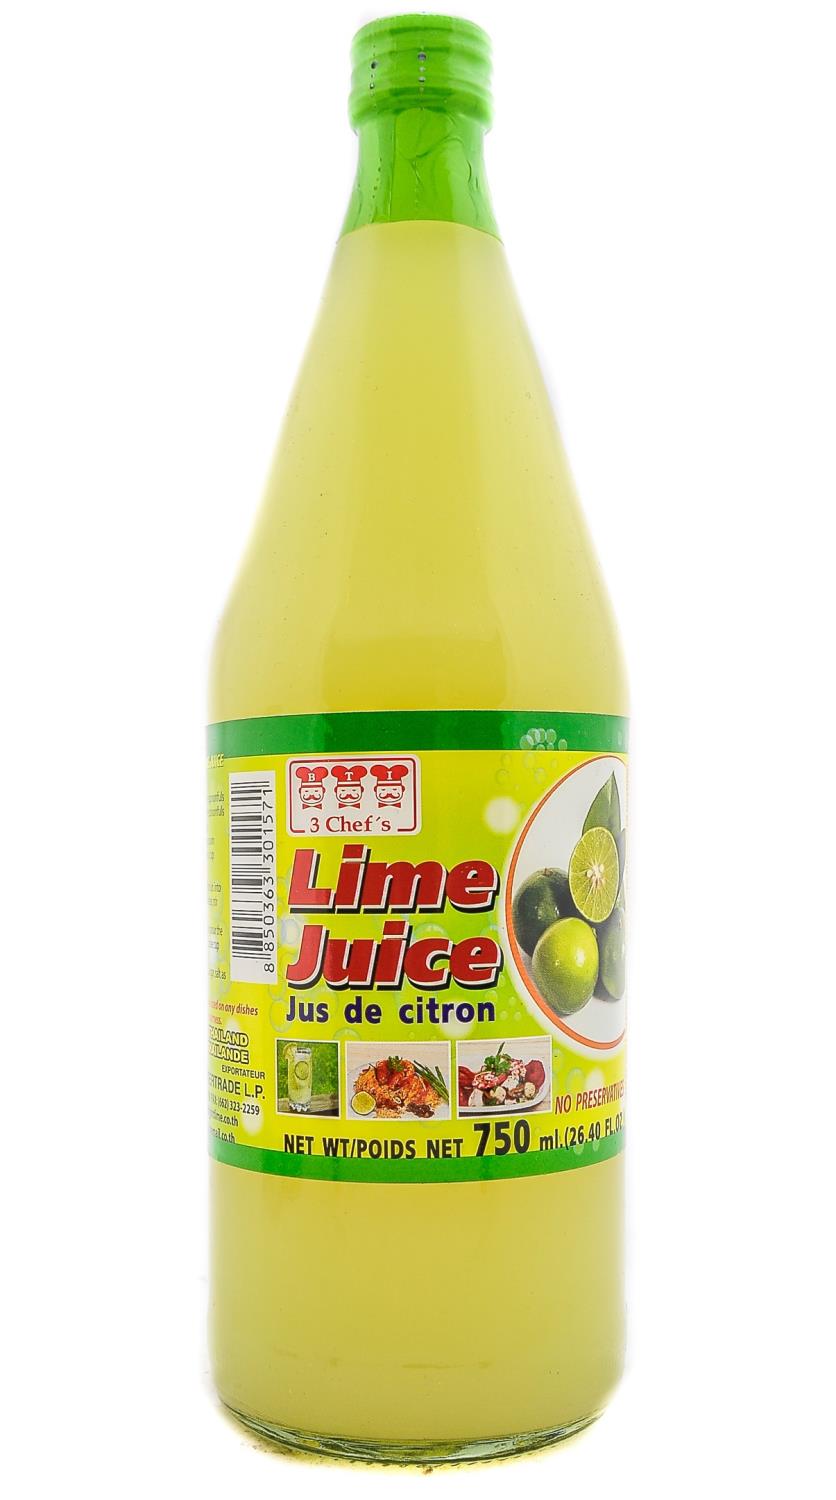 3 CHEF'S lime juice 750ml TH